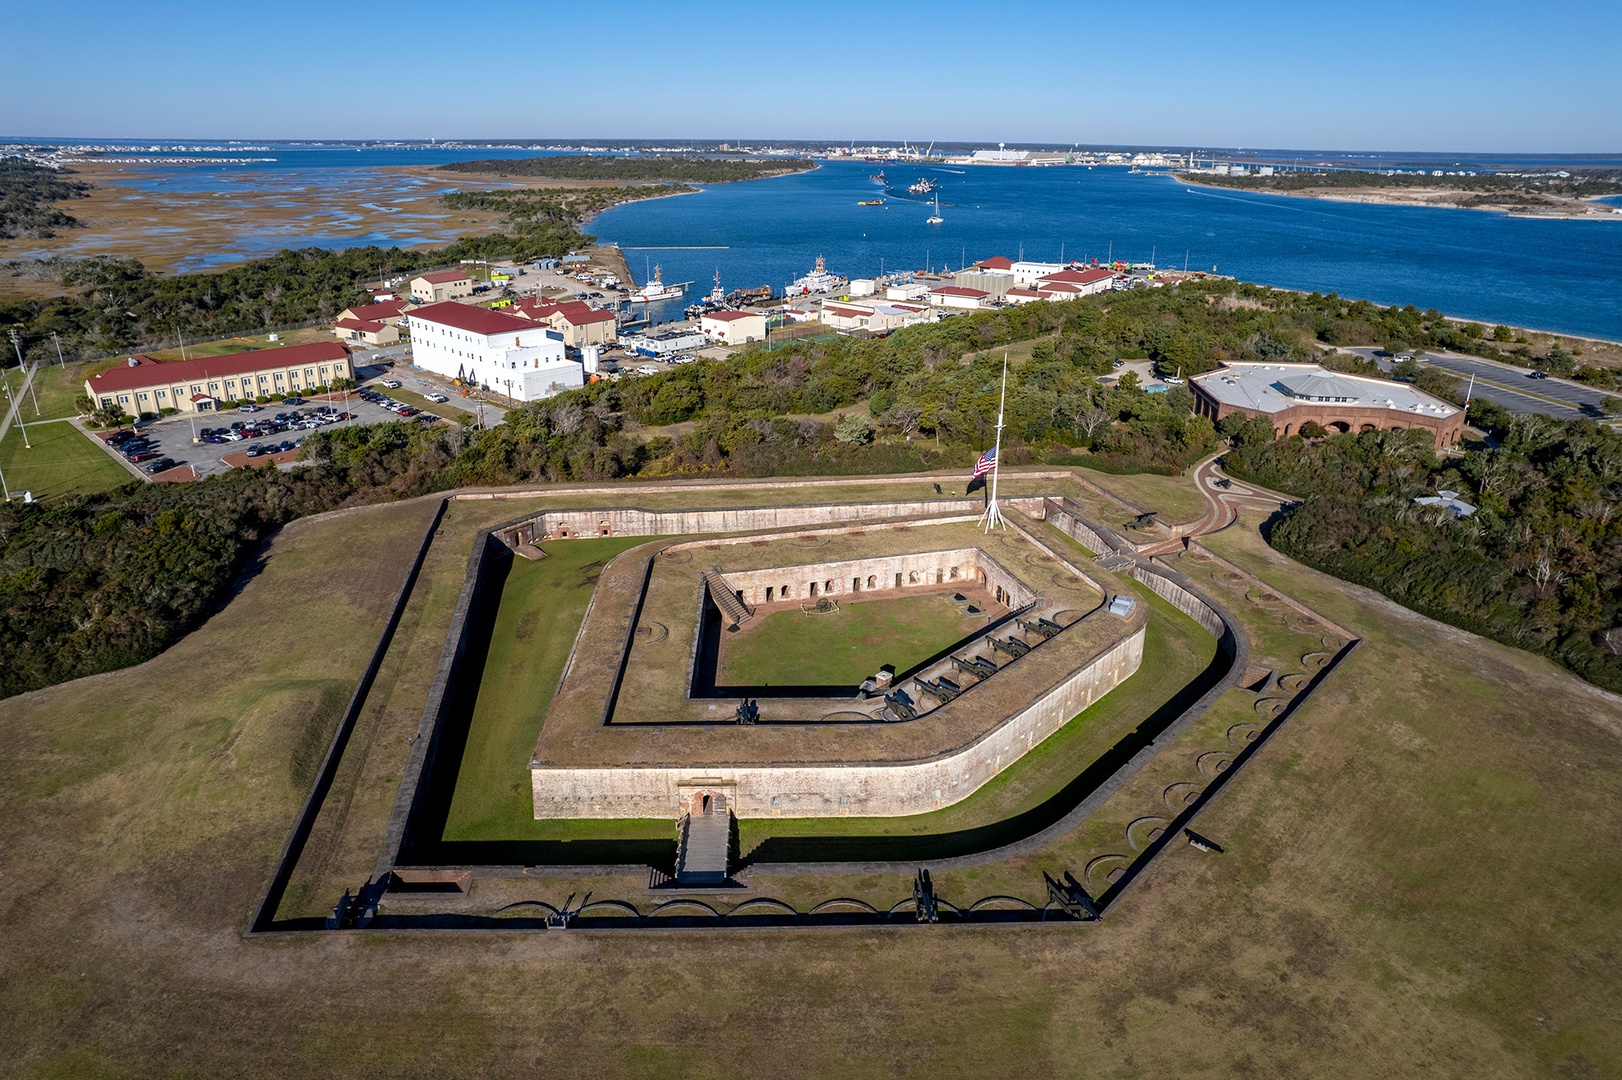 FORT MACON State Park